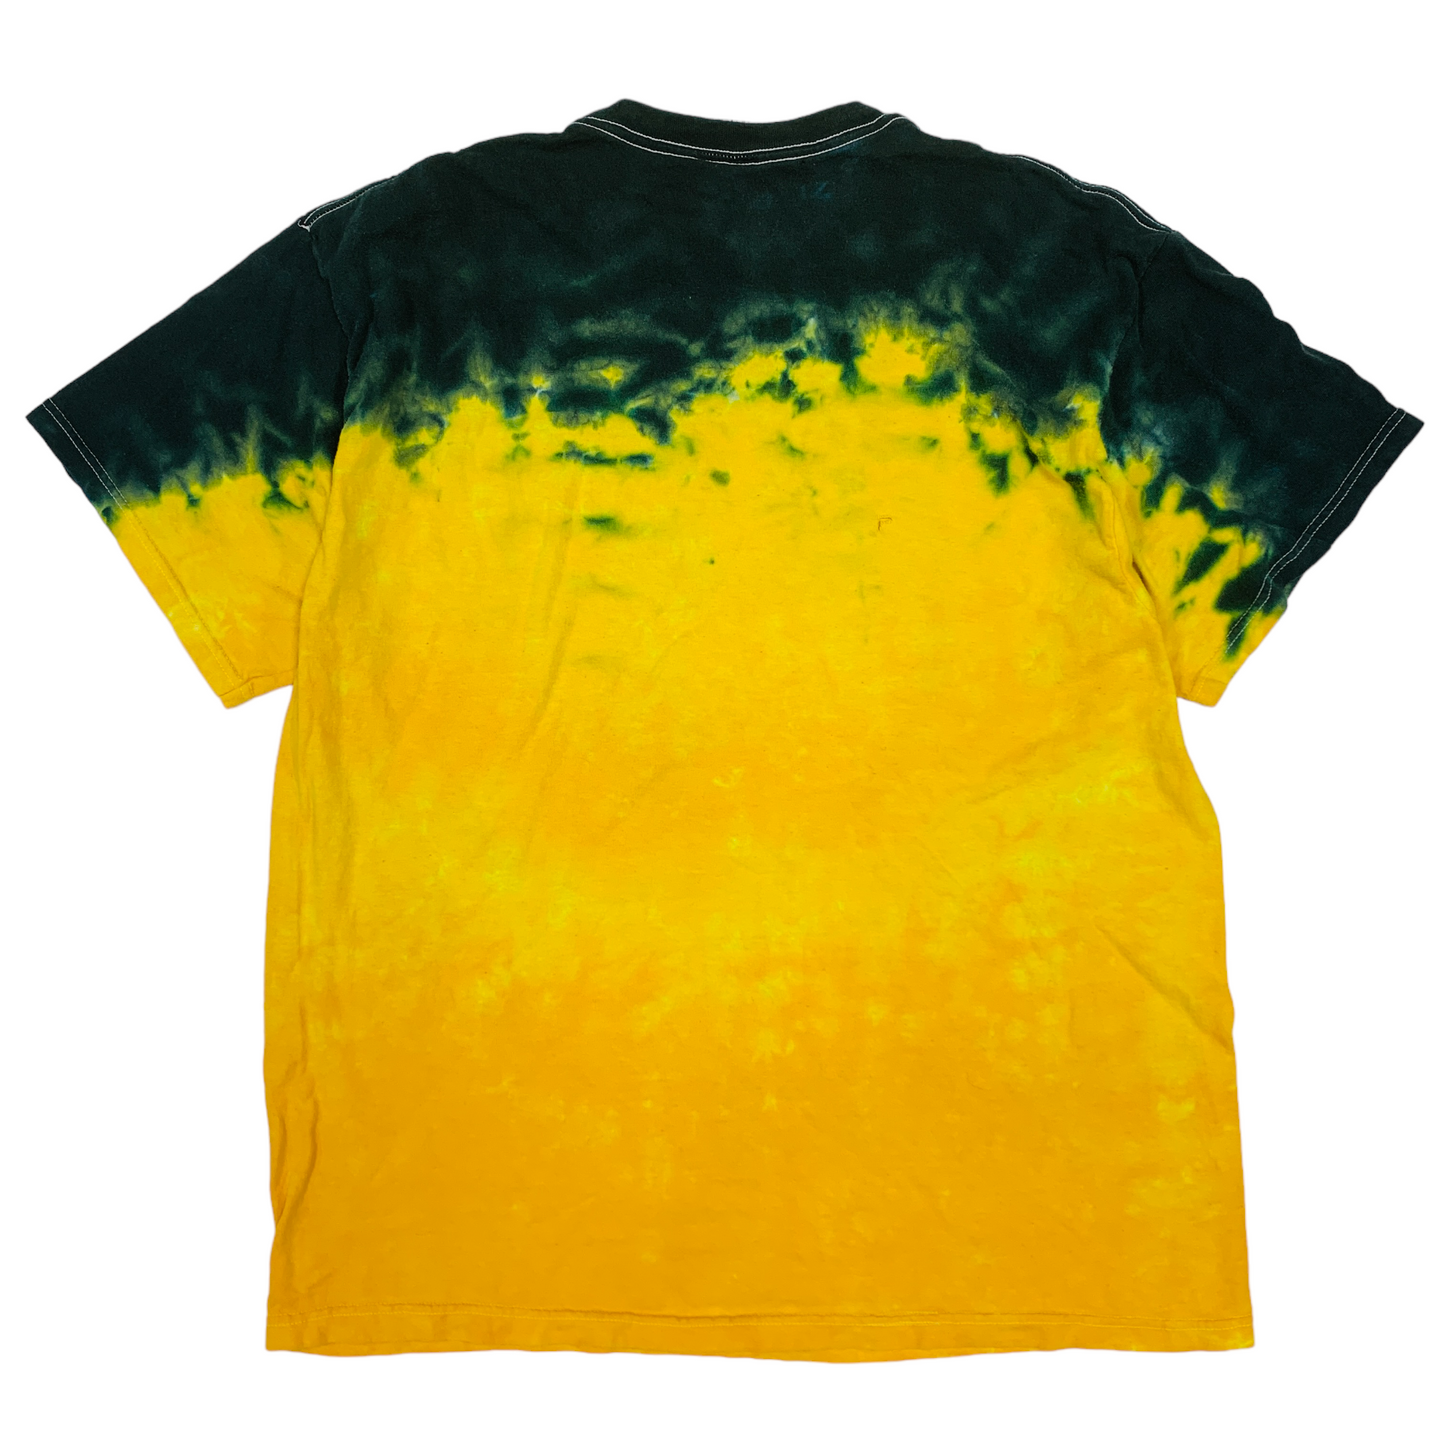 Pittsburgh Steelers NFL Tie Dye T-Shirt - XL – The Vintage Store